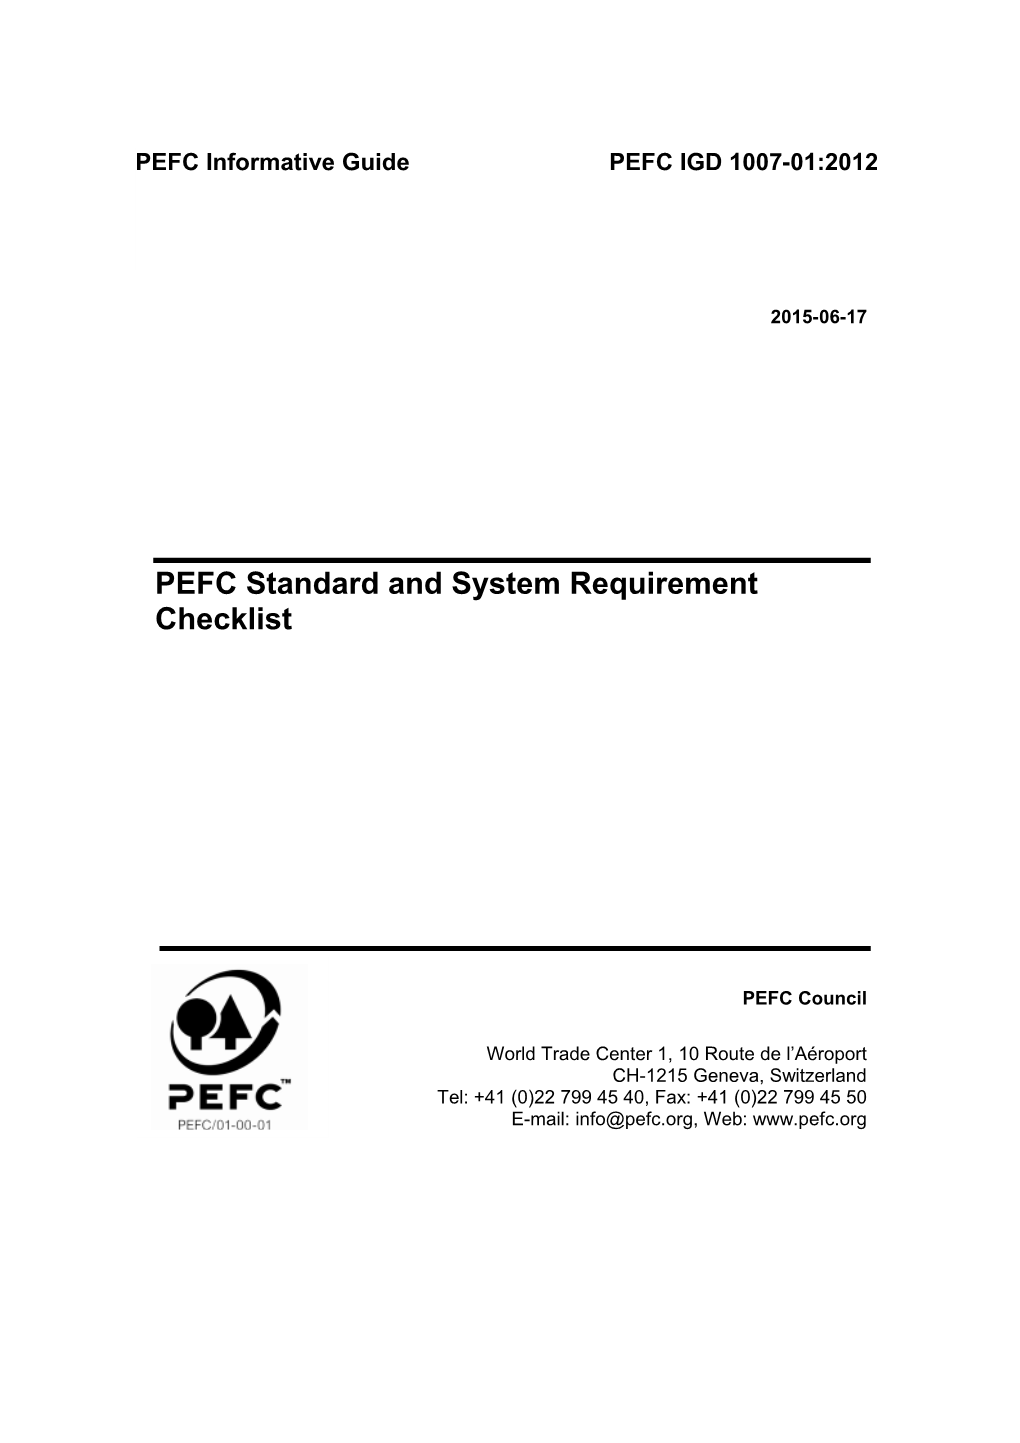 PEFC Standard and System Requirement Checklist